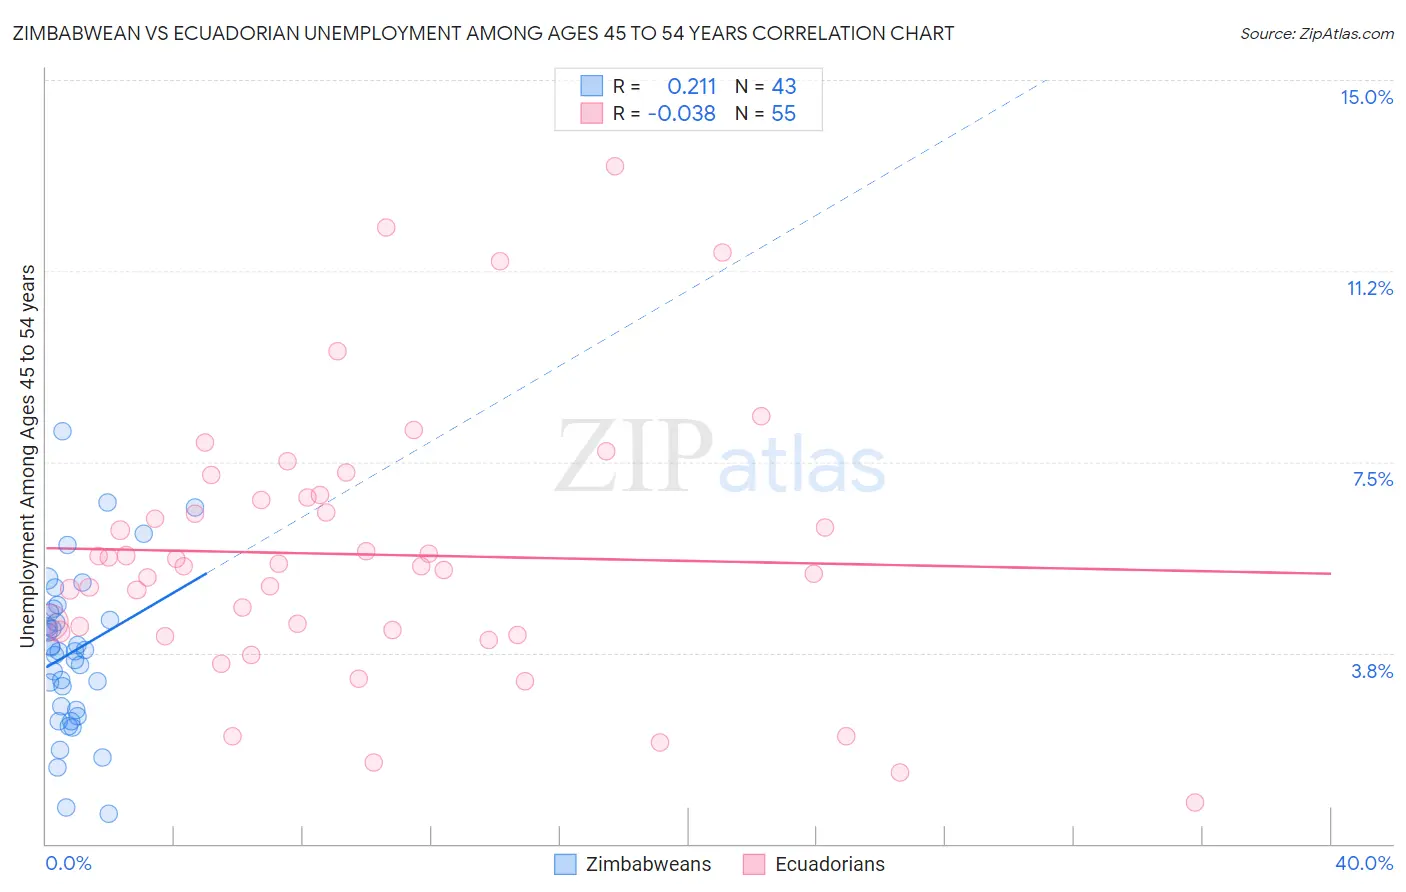 Zimbabwean vs Ecuadorian Unemployment Among Ages 45 to 54 years